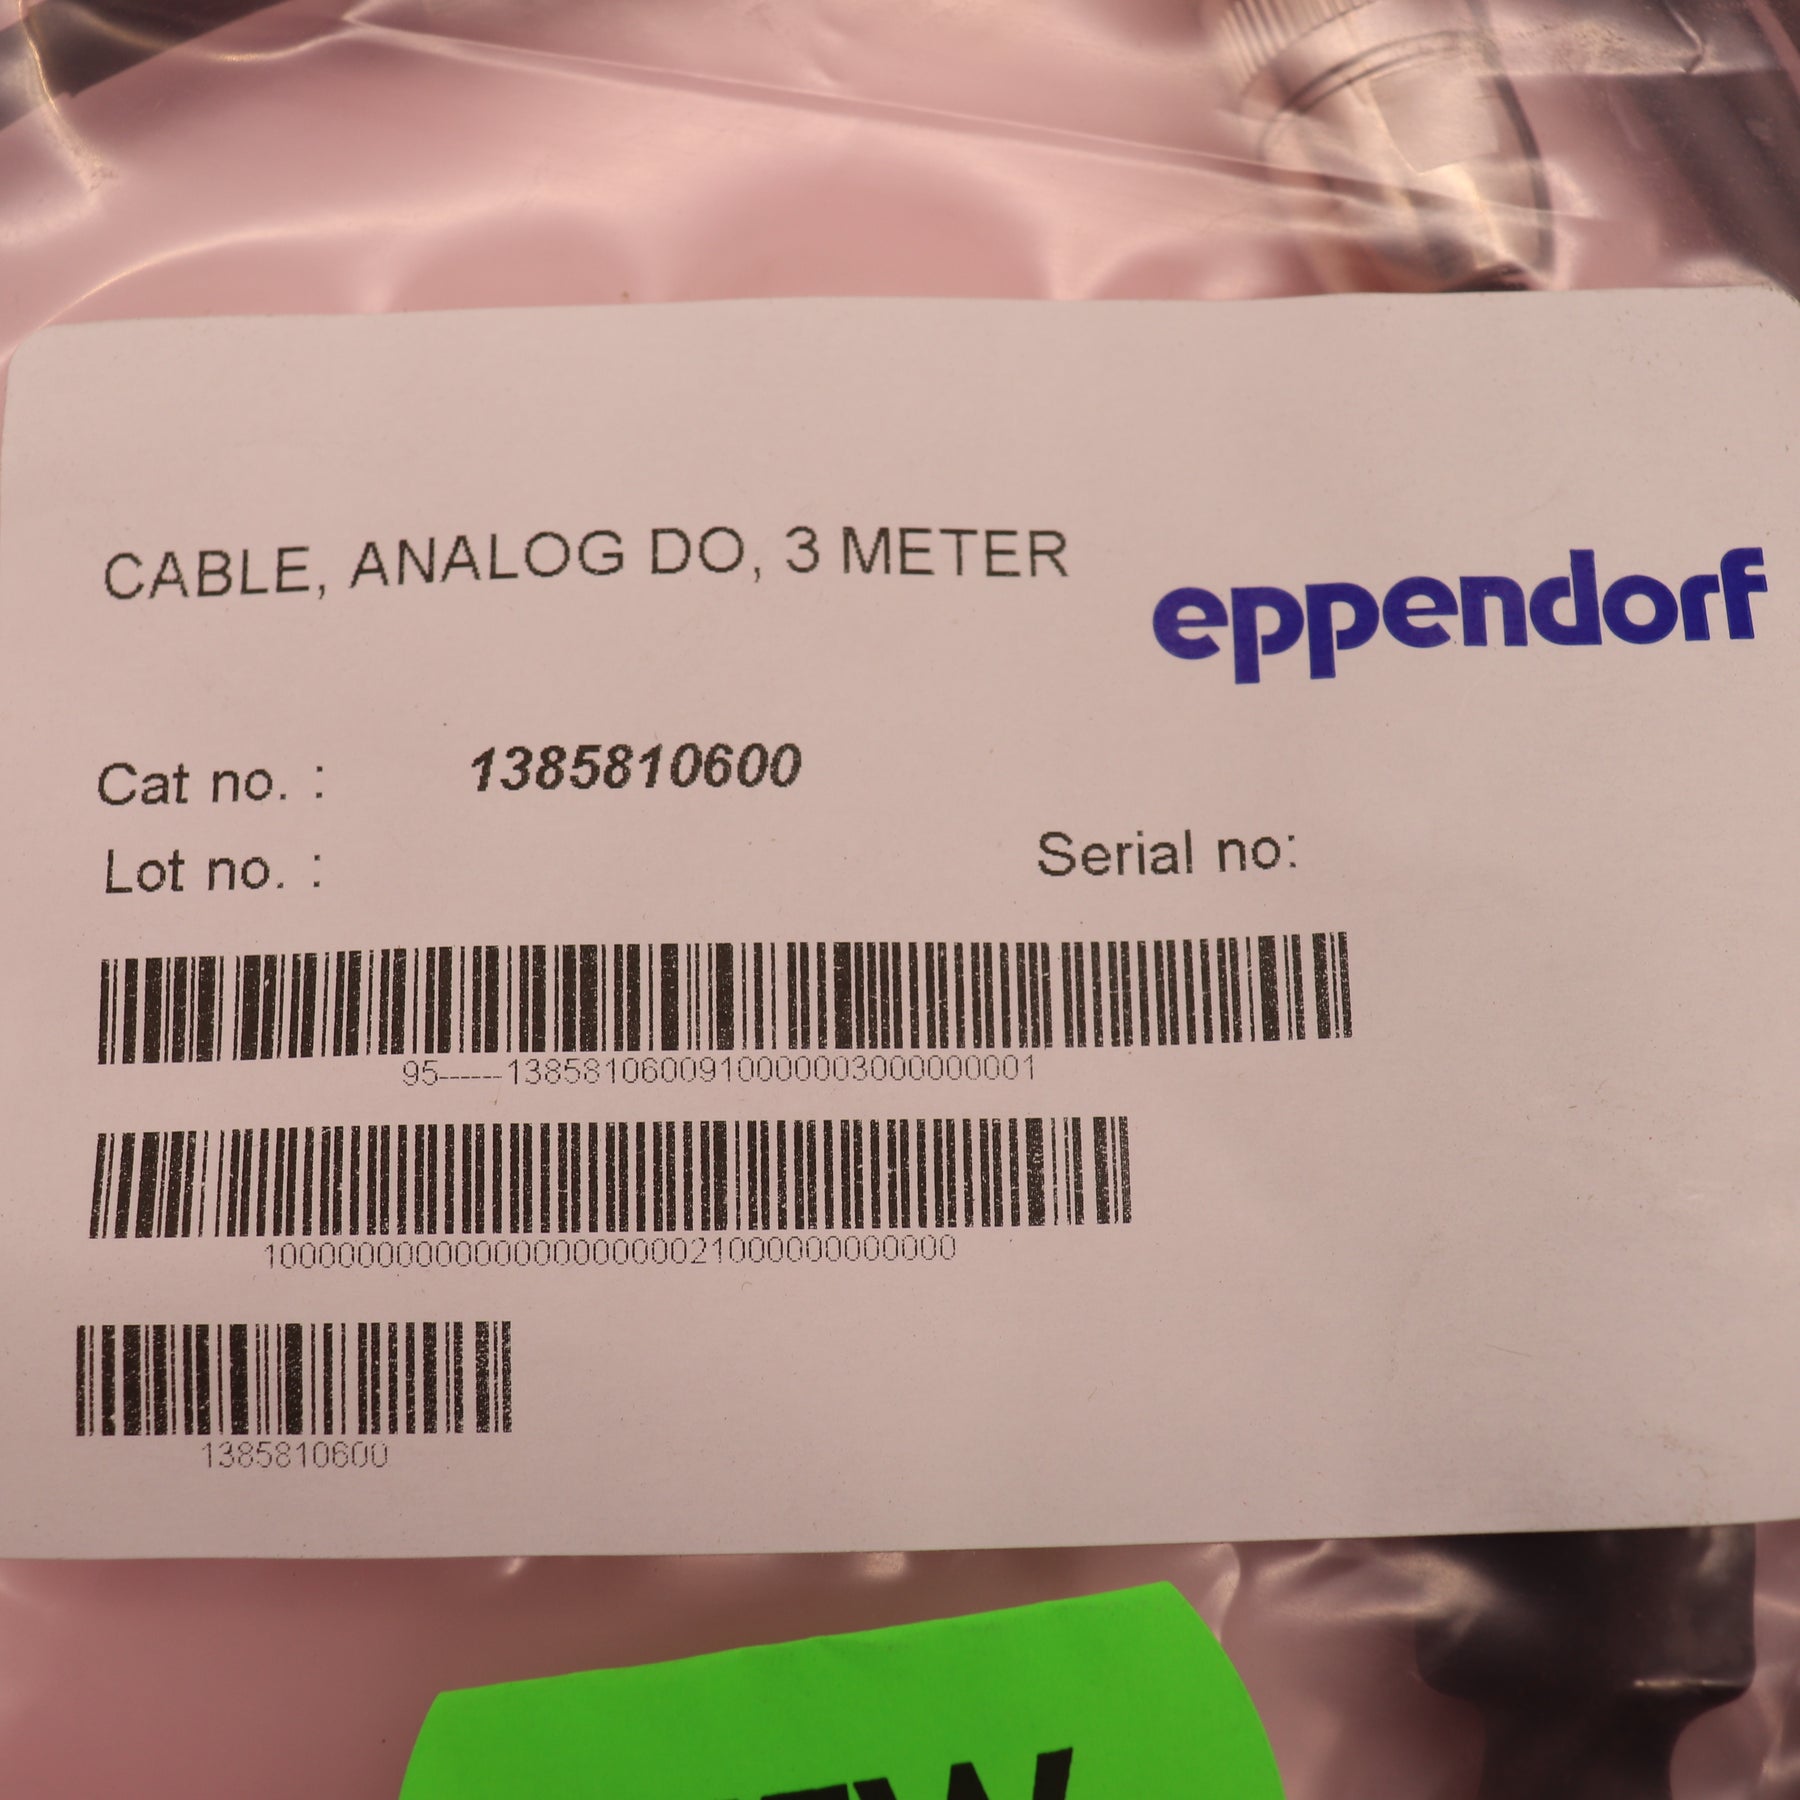 Eppendorf Analog DO Cable 3 Meters 1385810600